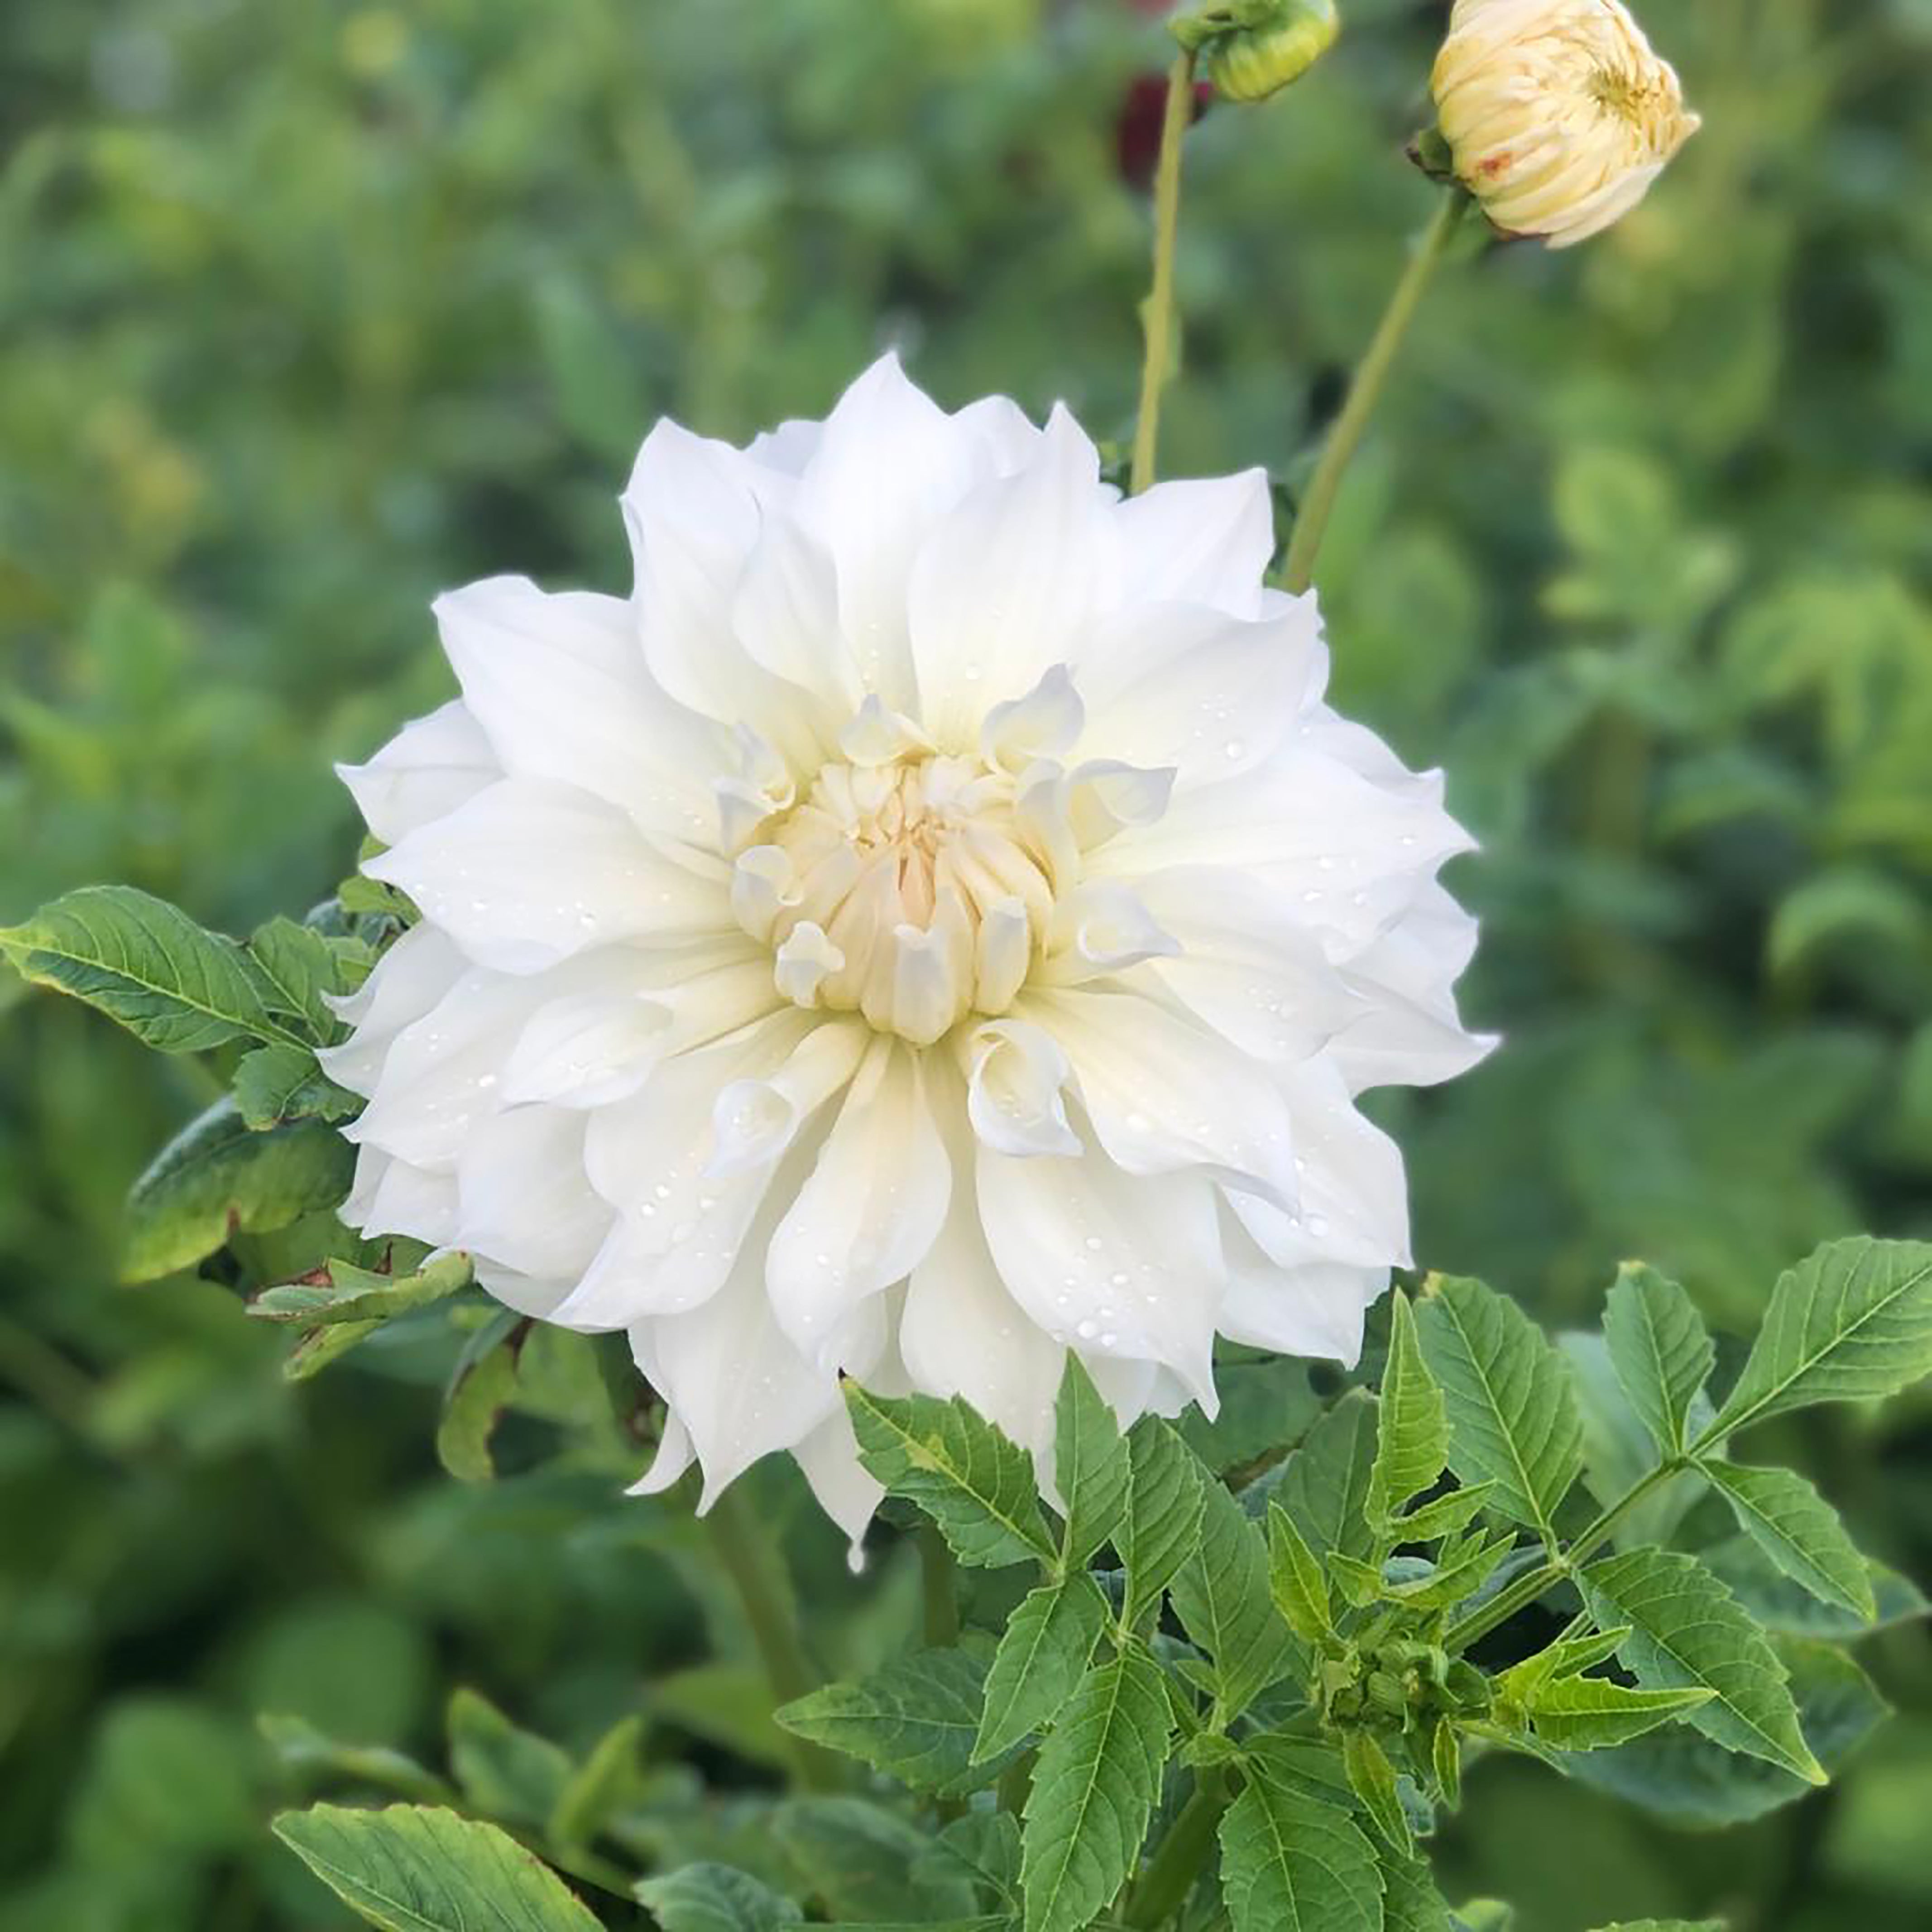 Dahlia 'Snowbound' decorative large flowered - 2, 3 or 5 tubers - Free delivery within the UK